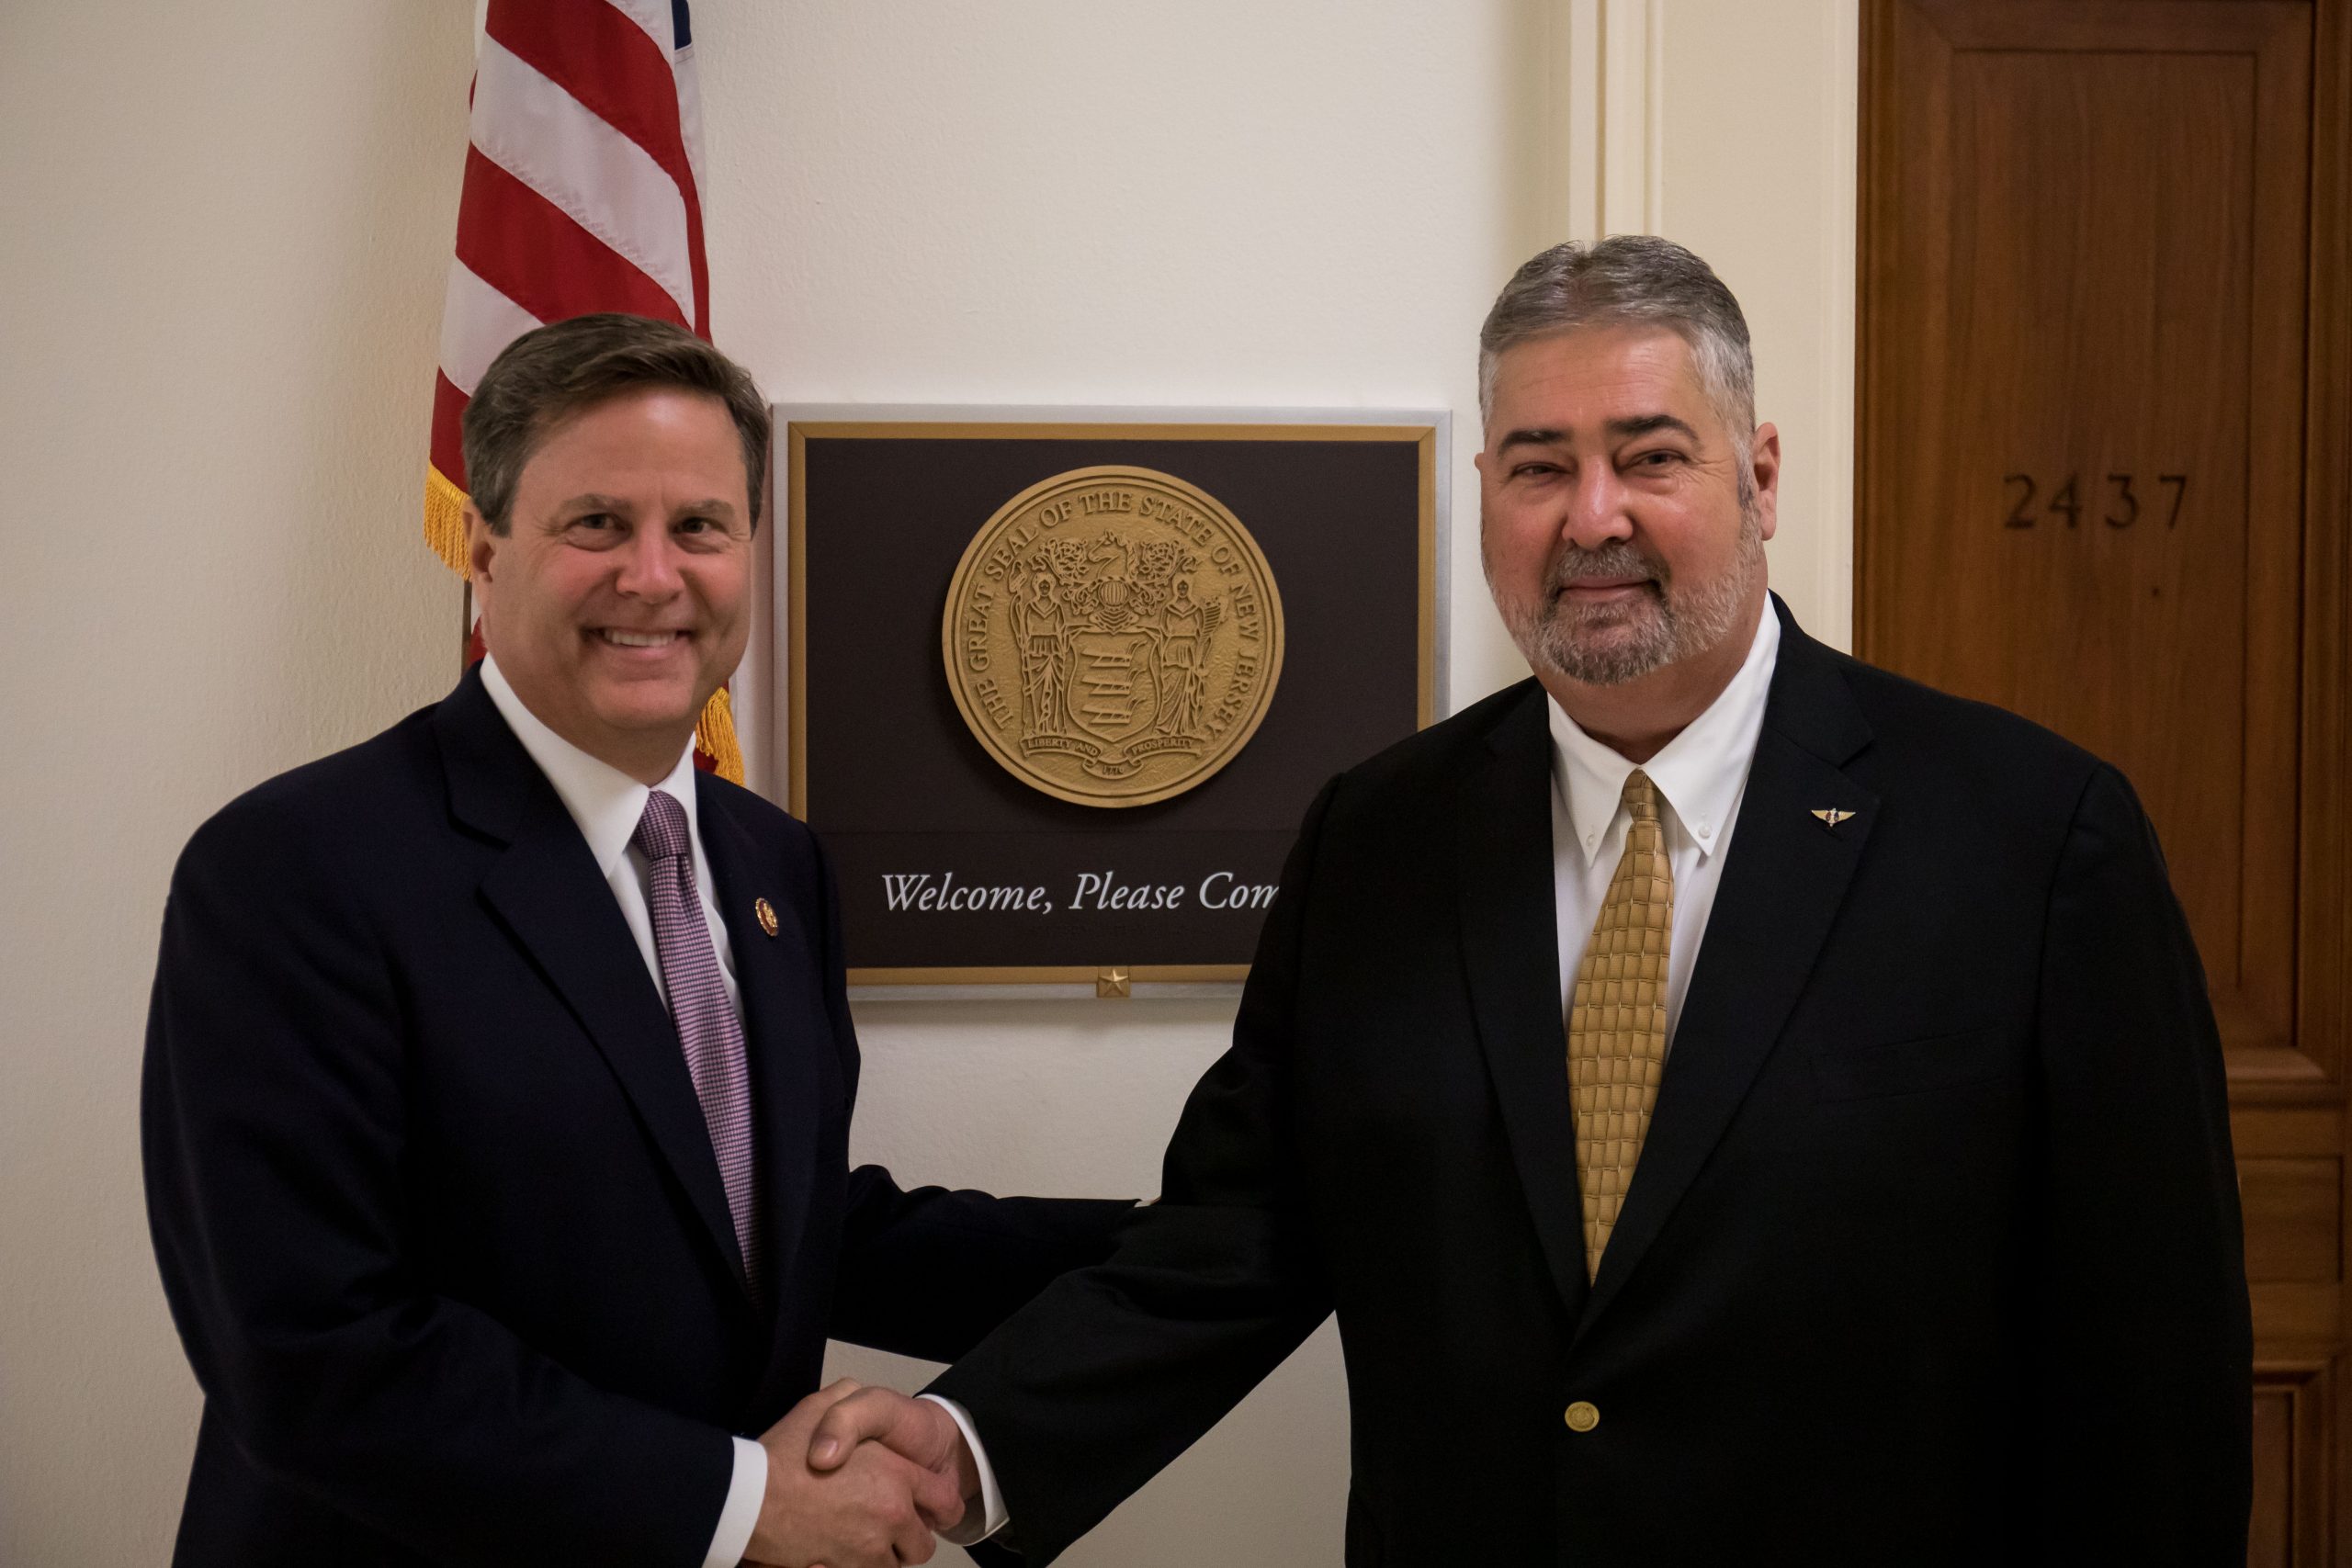 Machinists, Rep. Norcross Leading Charge for ‘Buy American’ Defense Expansion